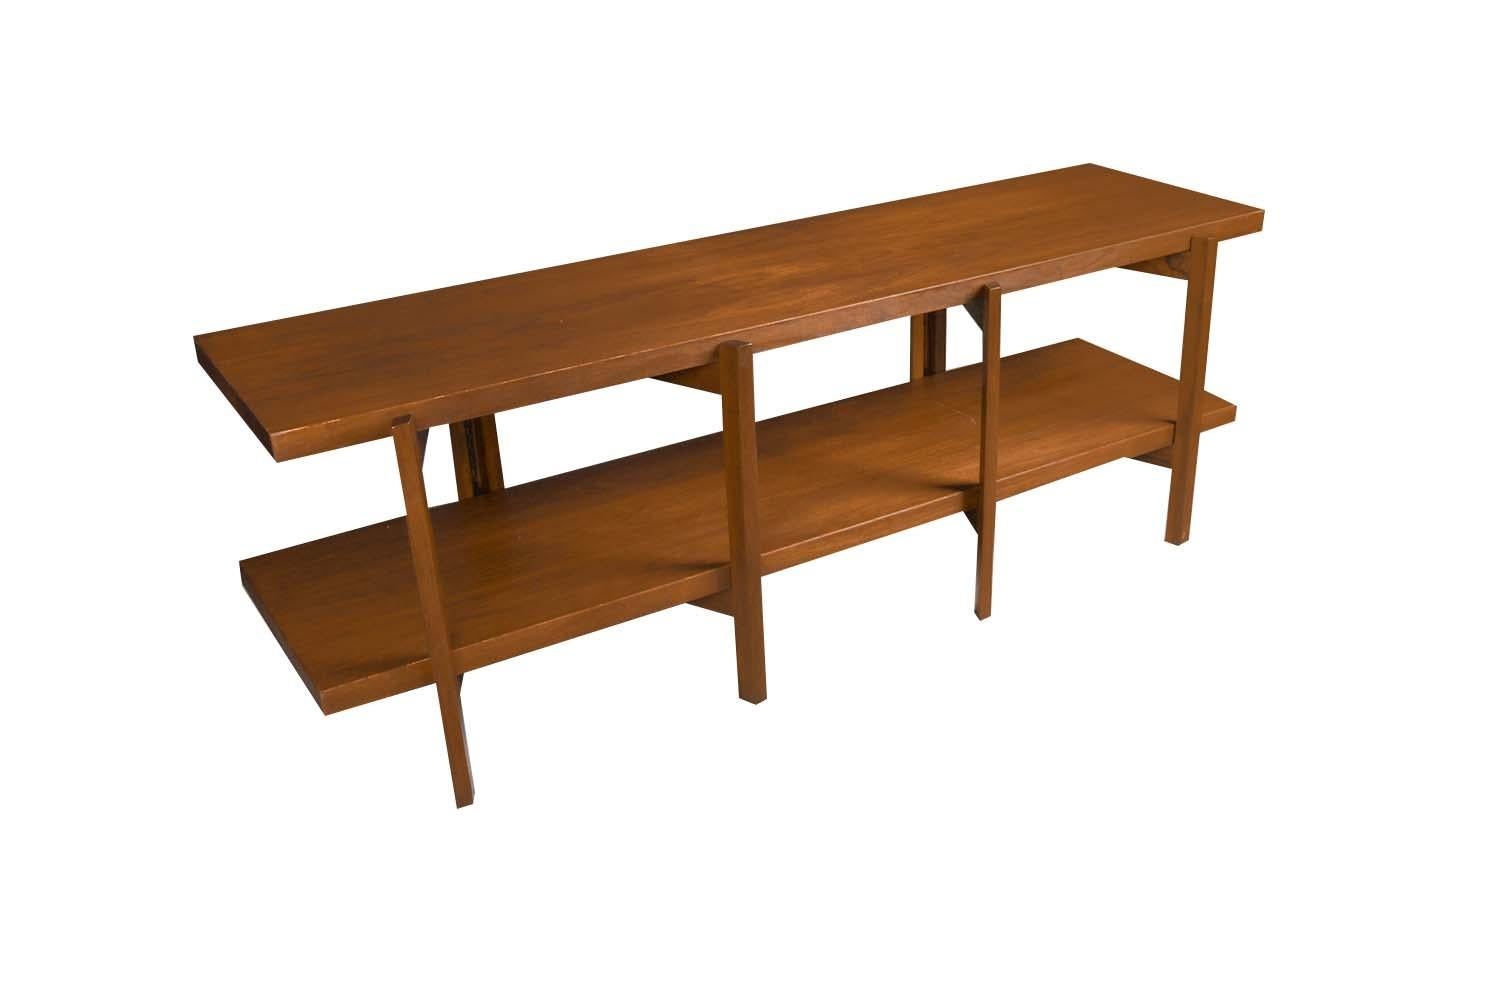 Midcentury Bruno Mathsson Danish Modern style two tier walnut table with folding gateleg base, circa 1960s. This versatile long bench form table can be used as a display table, accent table or media stand. Features beautifully grained walnut